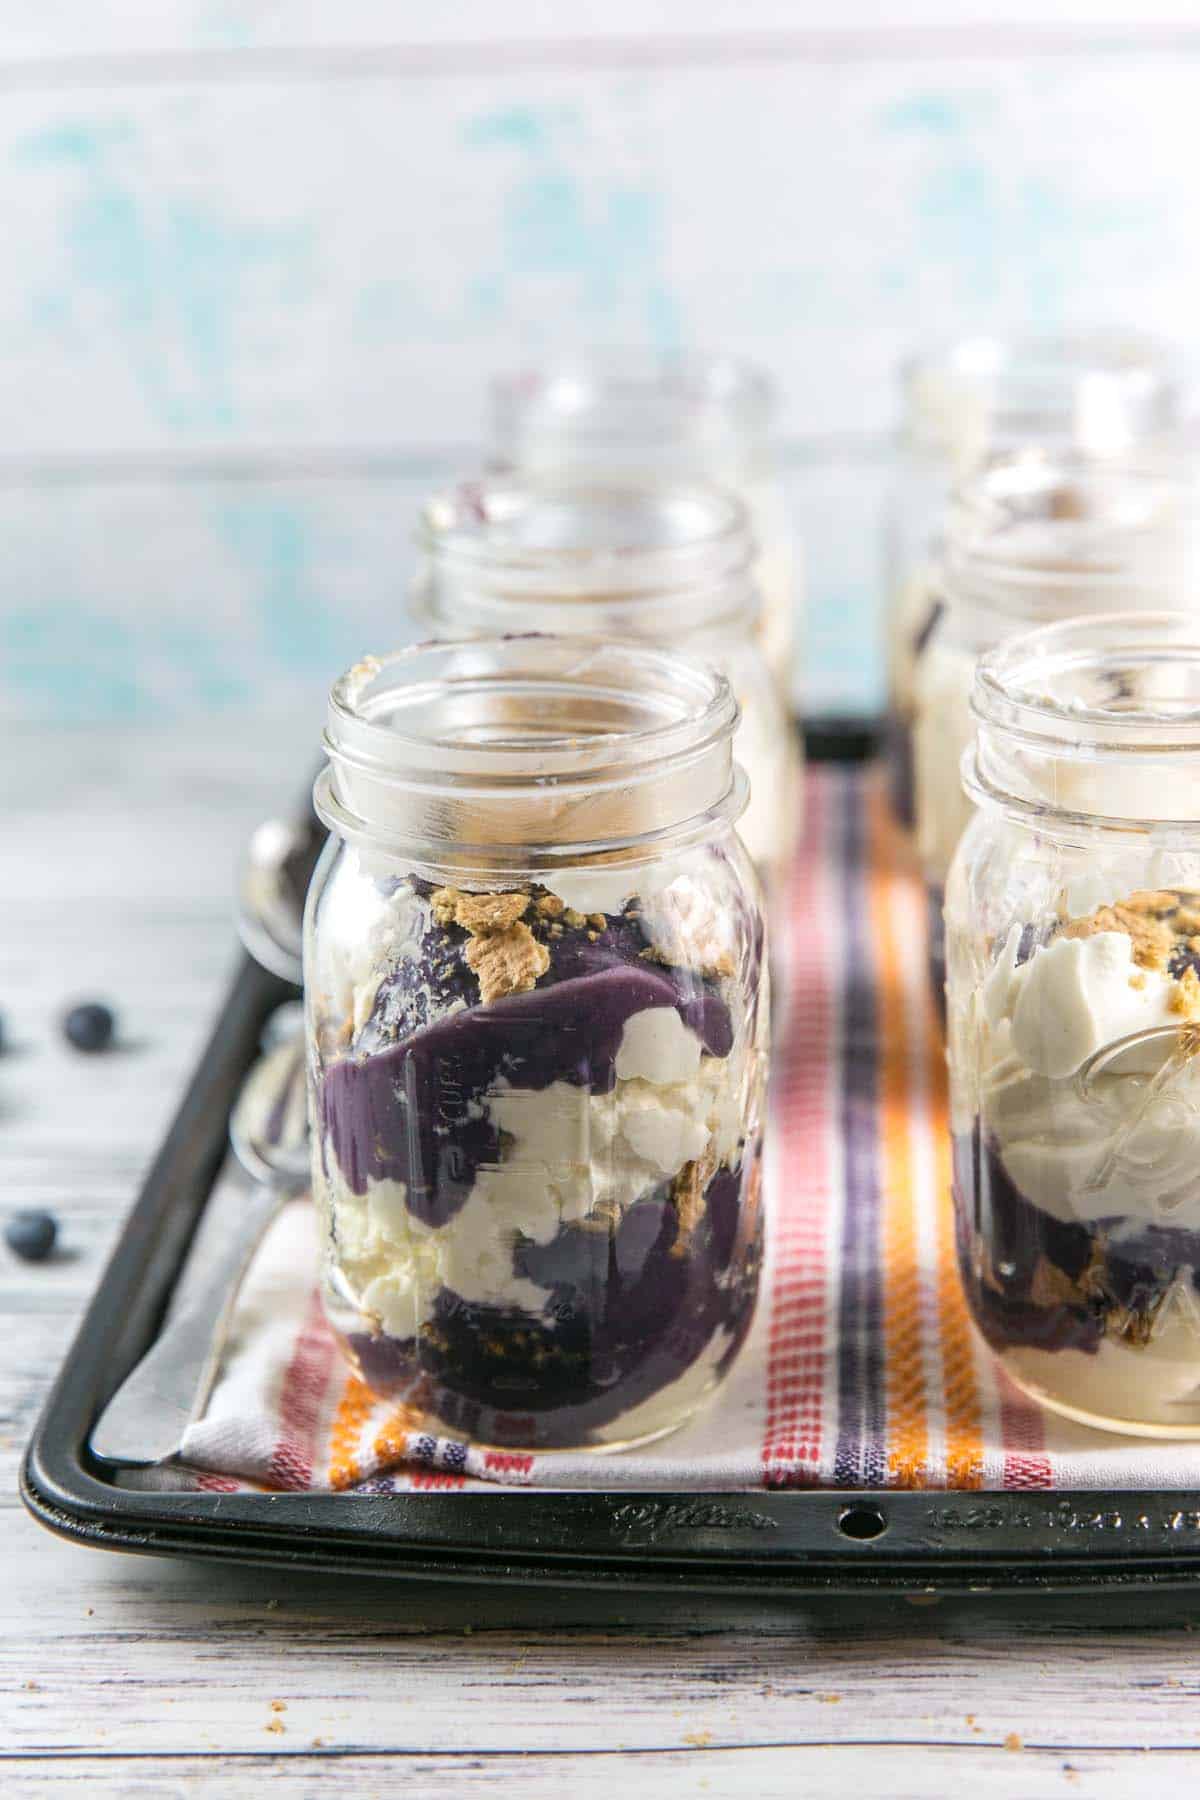 No Bake Cheesecake Parfaits with Blueberry Curd: an easy, fancy, make ahead treat perfect for dinner parties. Layers of a cream cheese and mascarpone cheesecake, blueberry cardamom curd, and crumbled graham crackers. #bunsenburnerbakery #cheesecake #cheesecakeparfaits #nobakedesserts